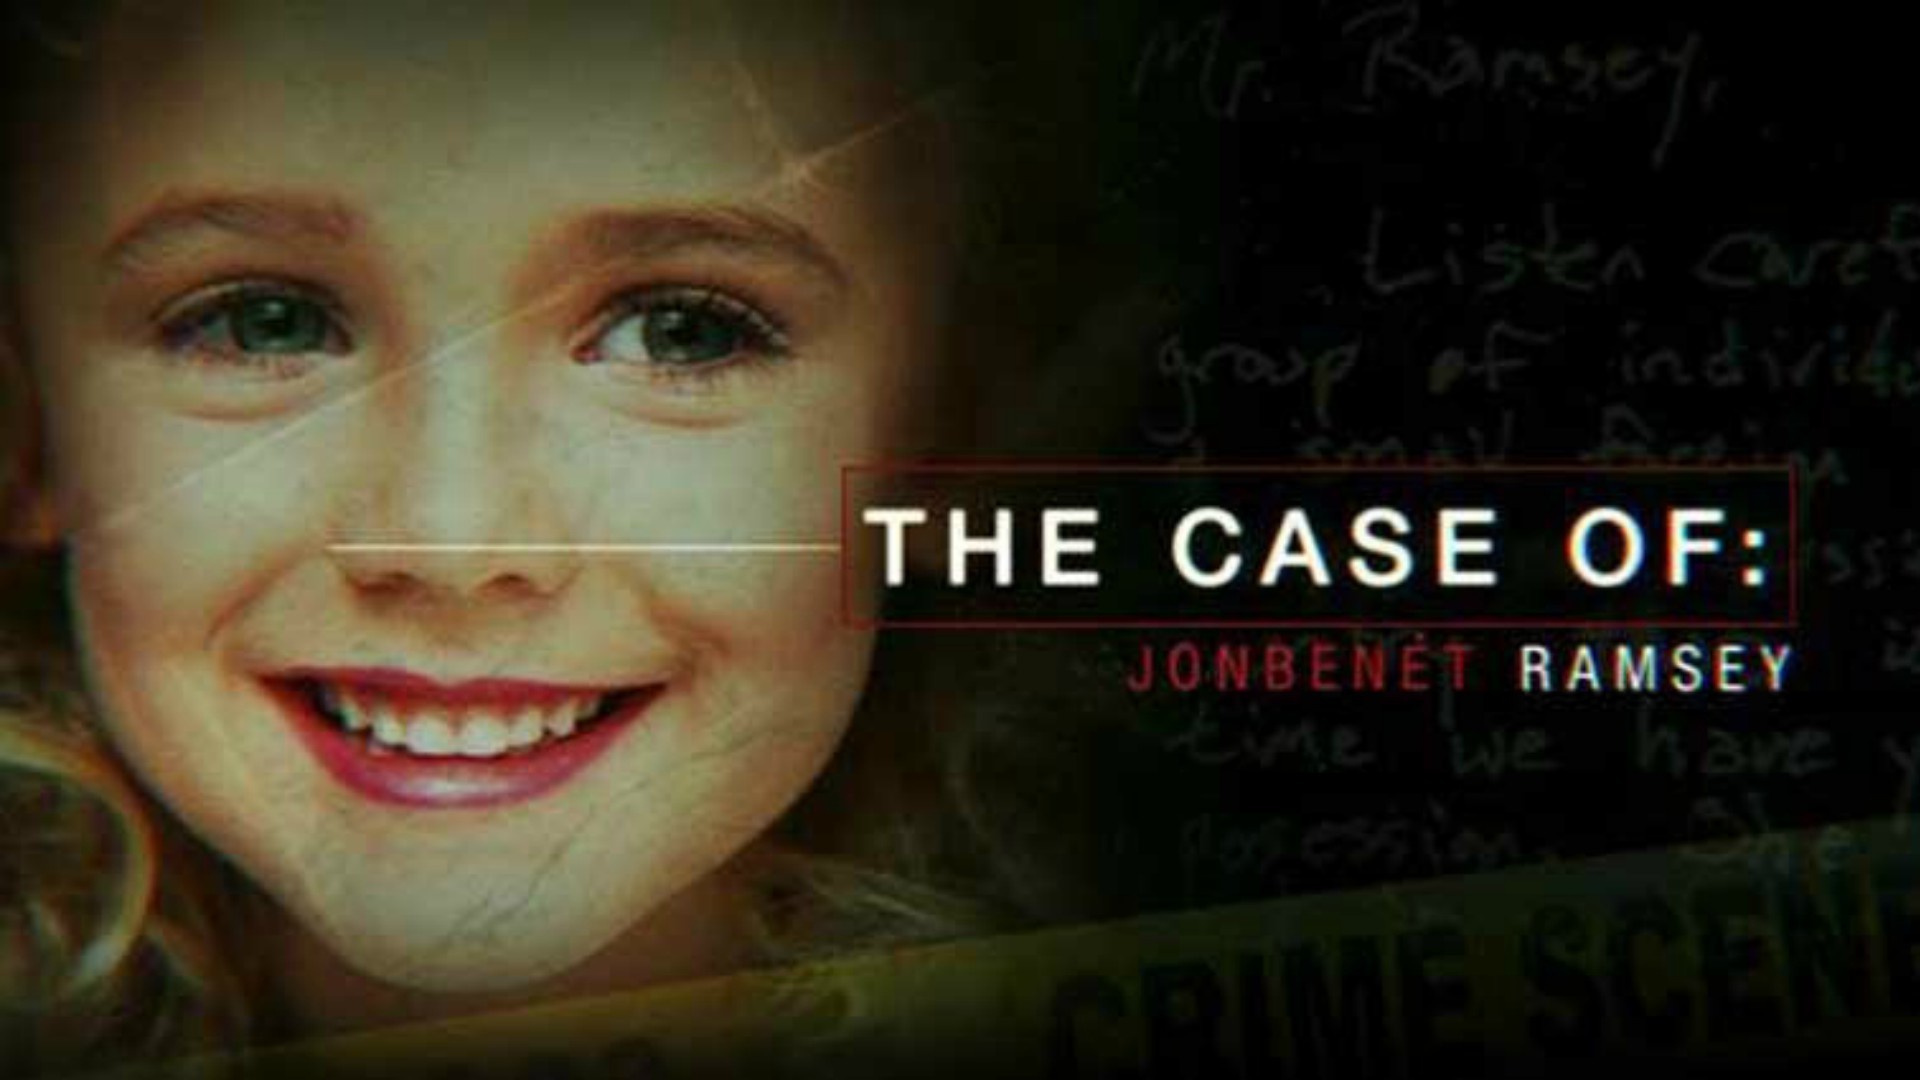 cbs-just-might-solve-the-jonbenet-ramsey-case-once-and-for-all